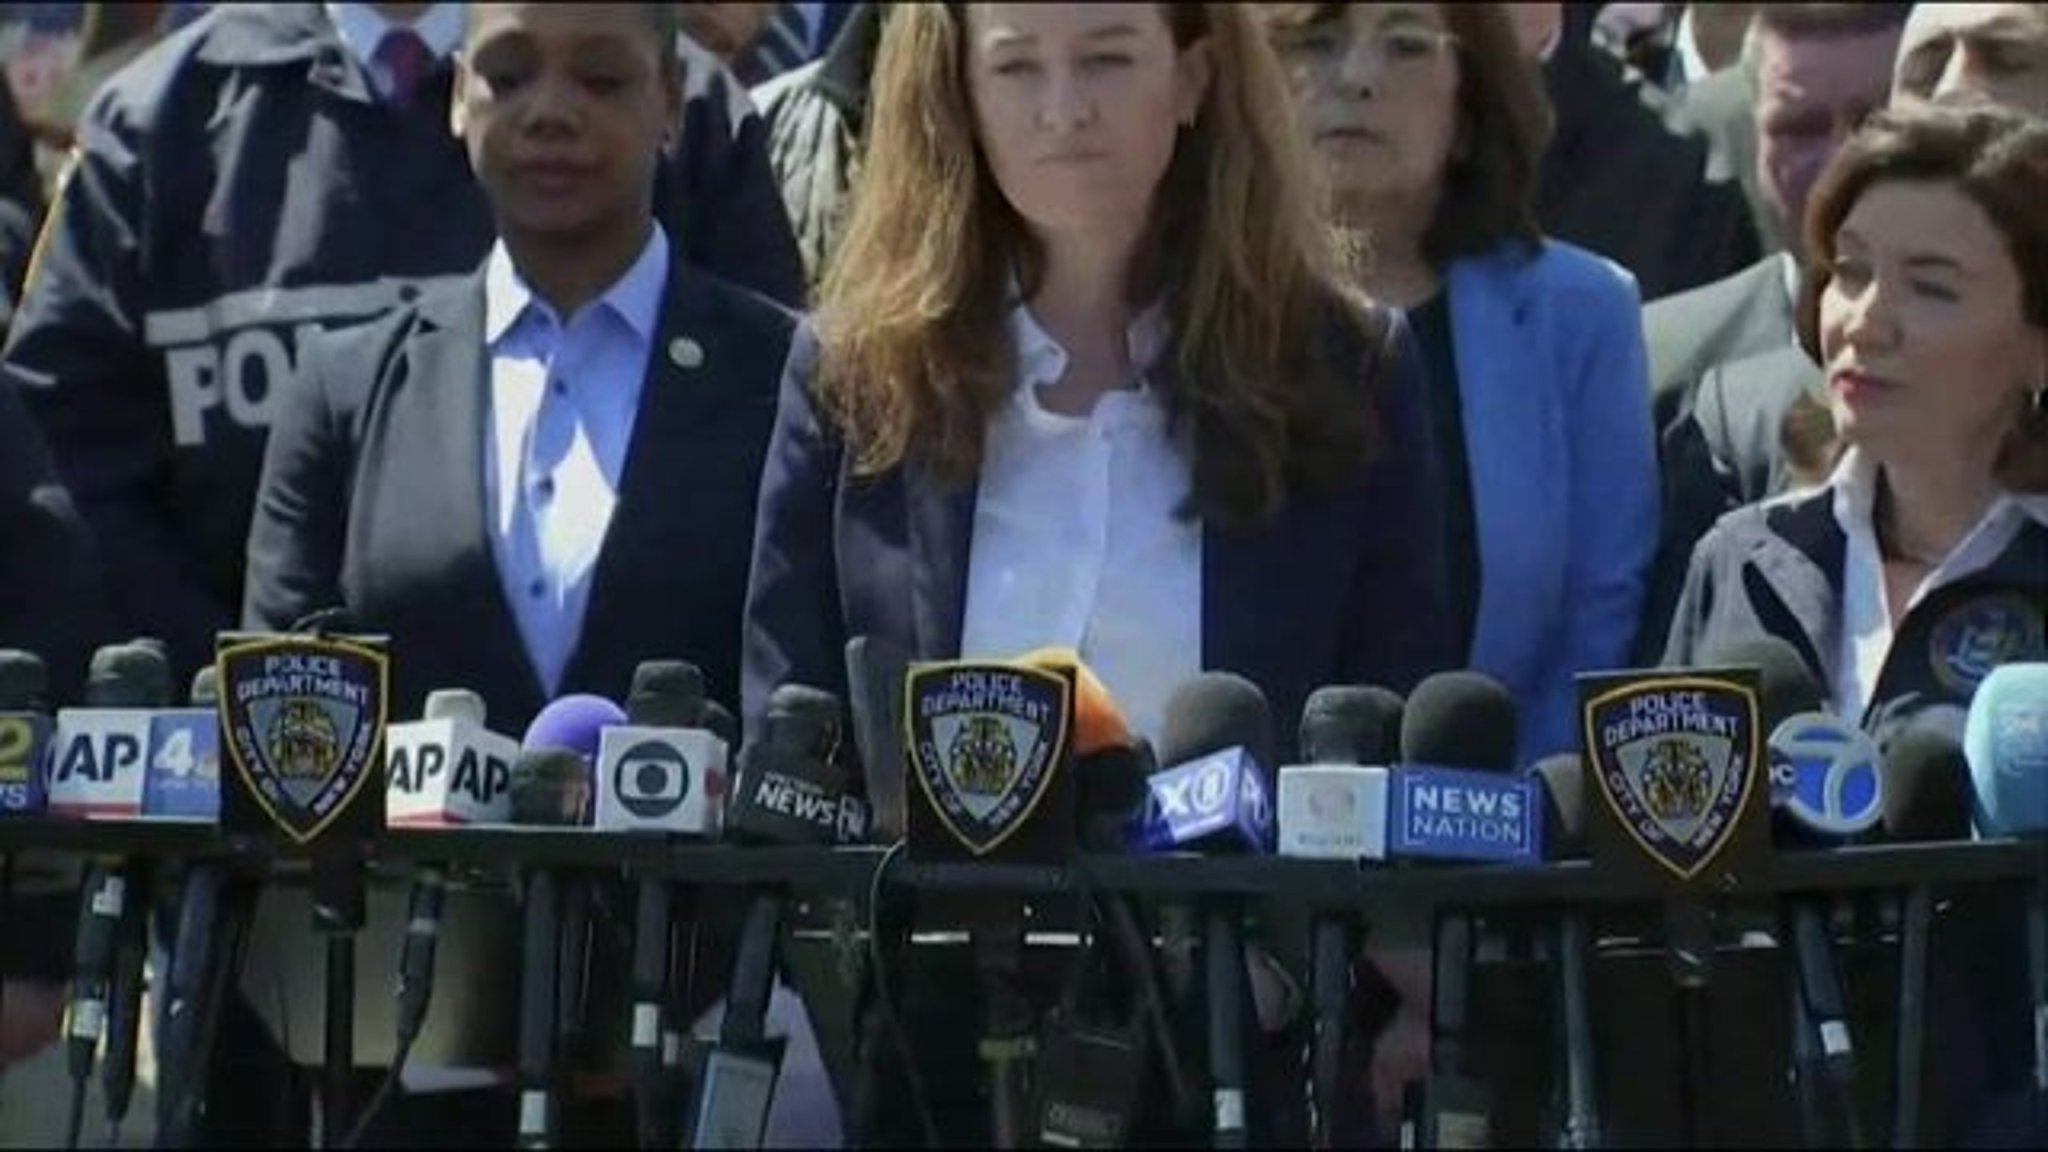 Update on victims in Brooklyn attack: 16 patients are being treated at local hospitals, 10 suffered gunshot wounds.